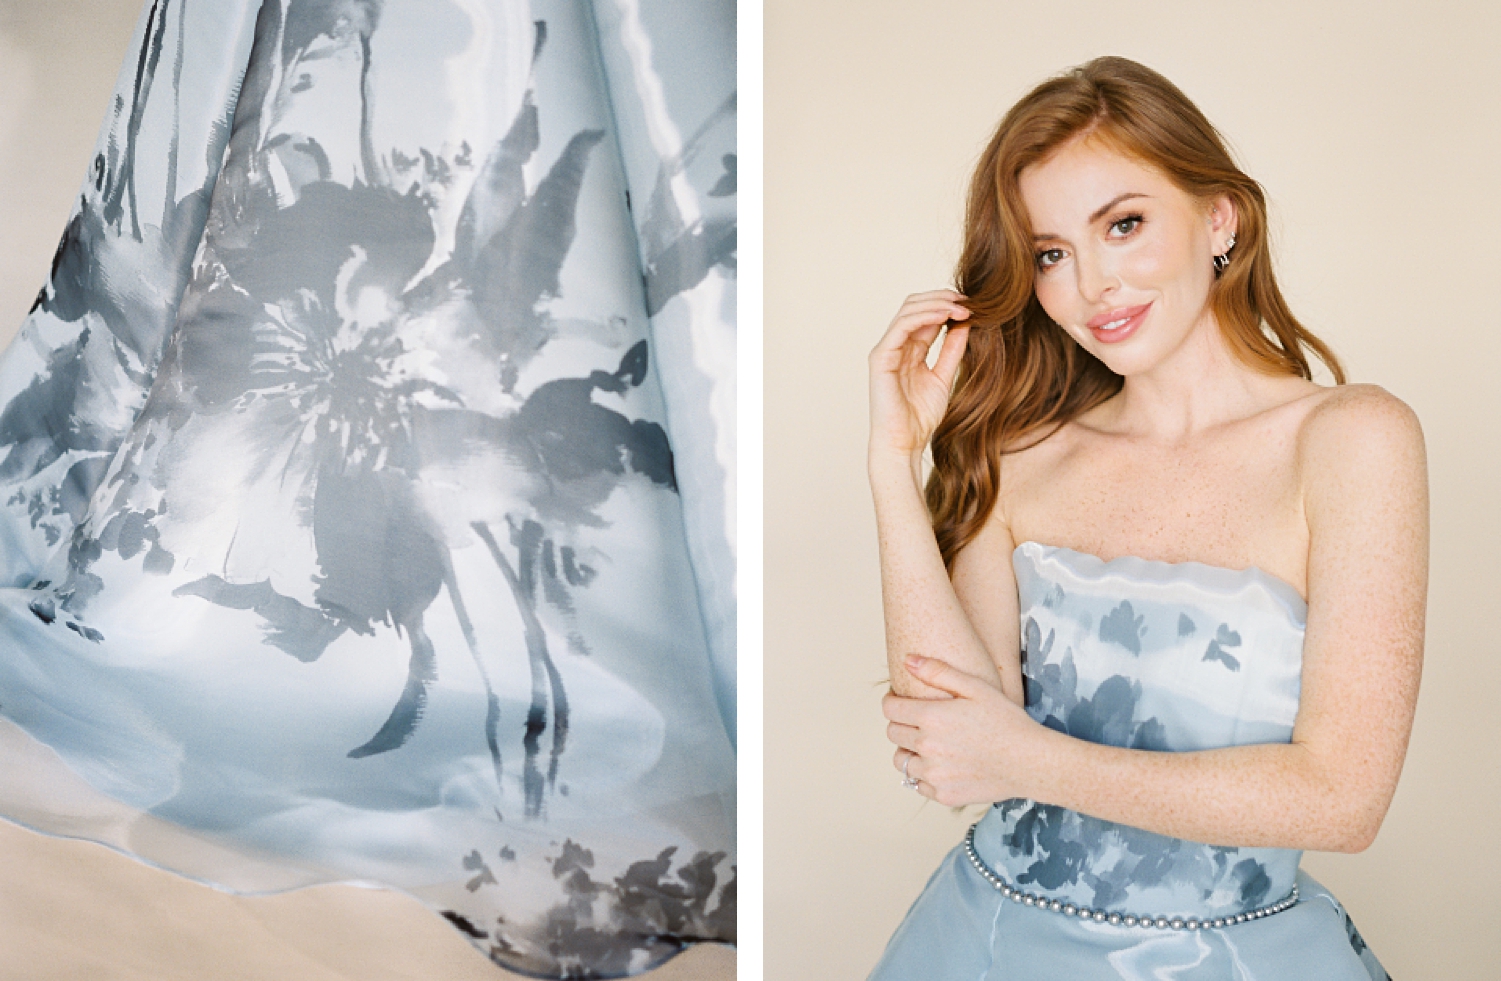 Blue floral ball gown worn by redhead woman with hand on elbow